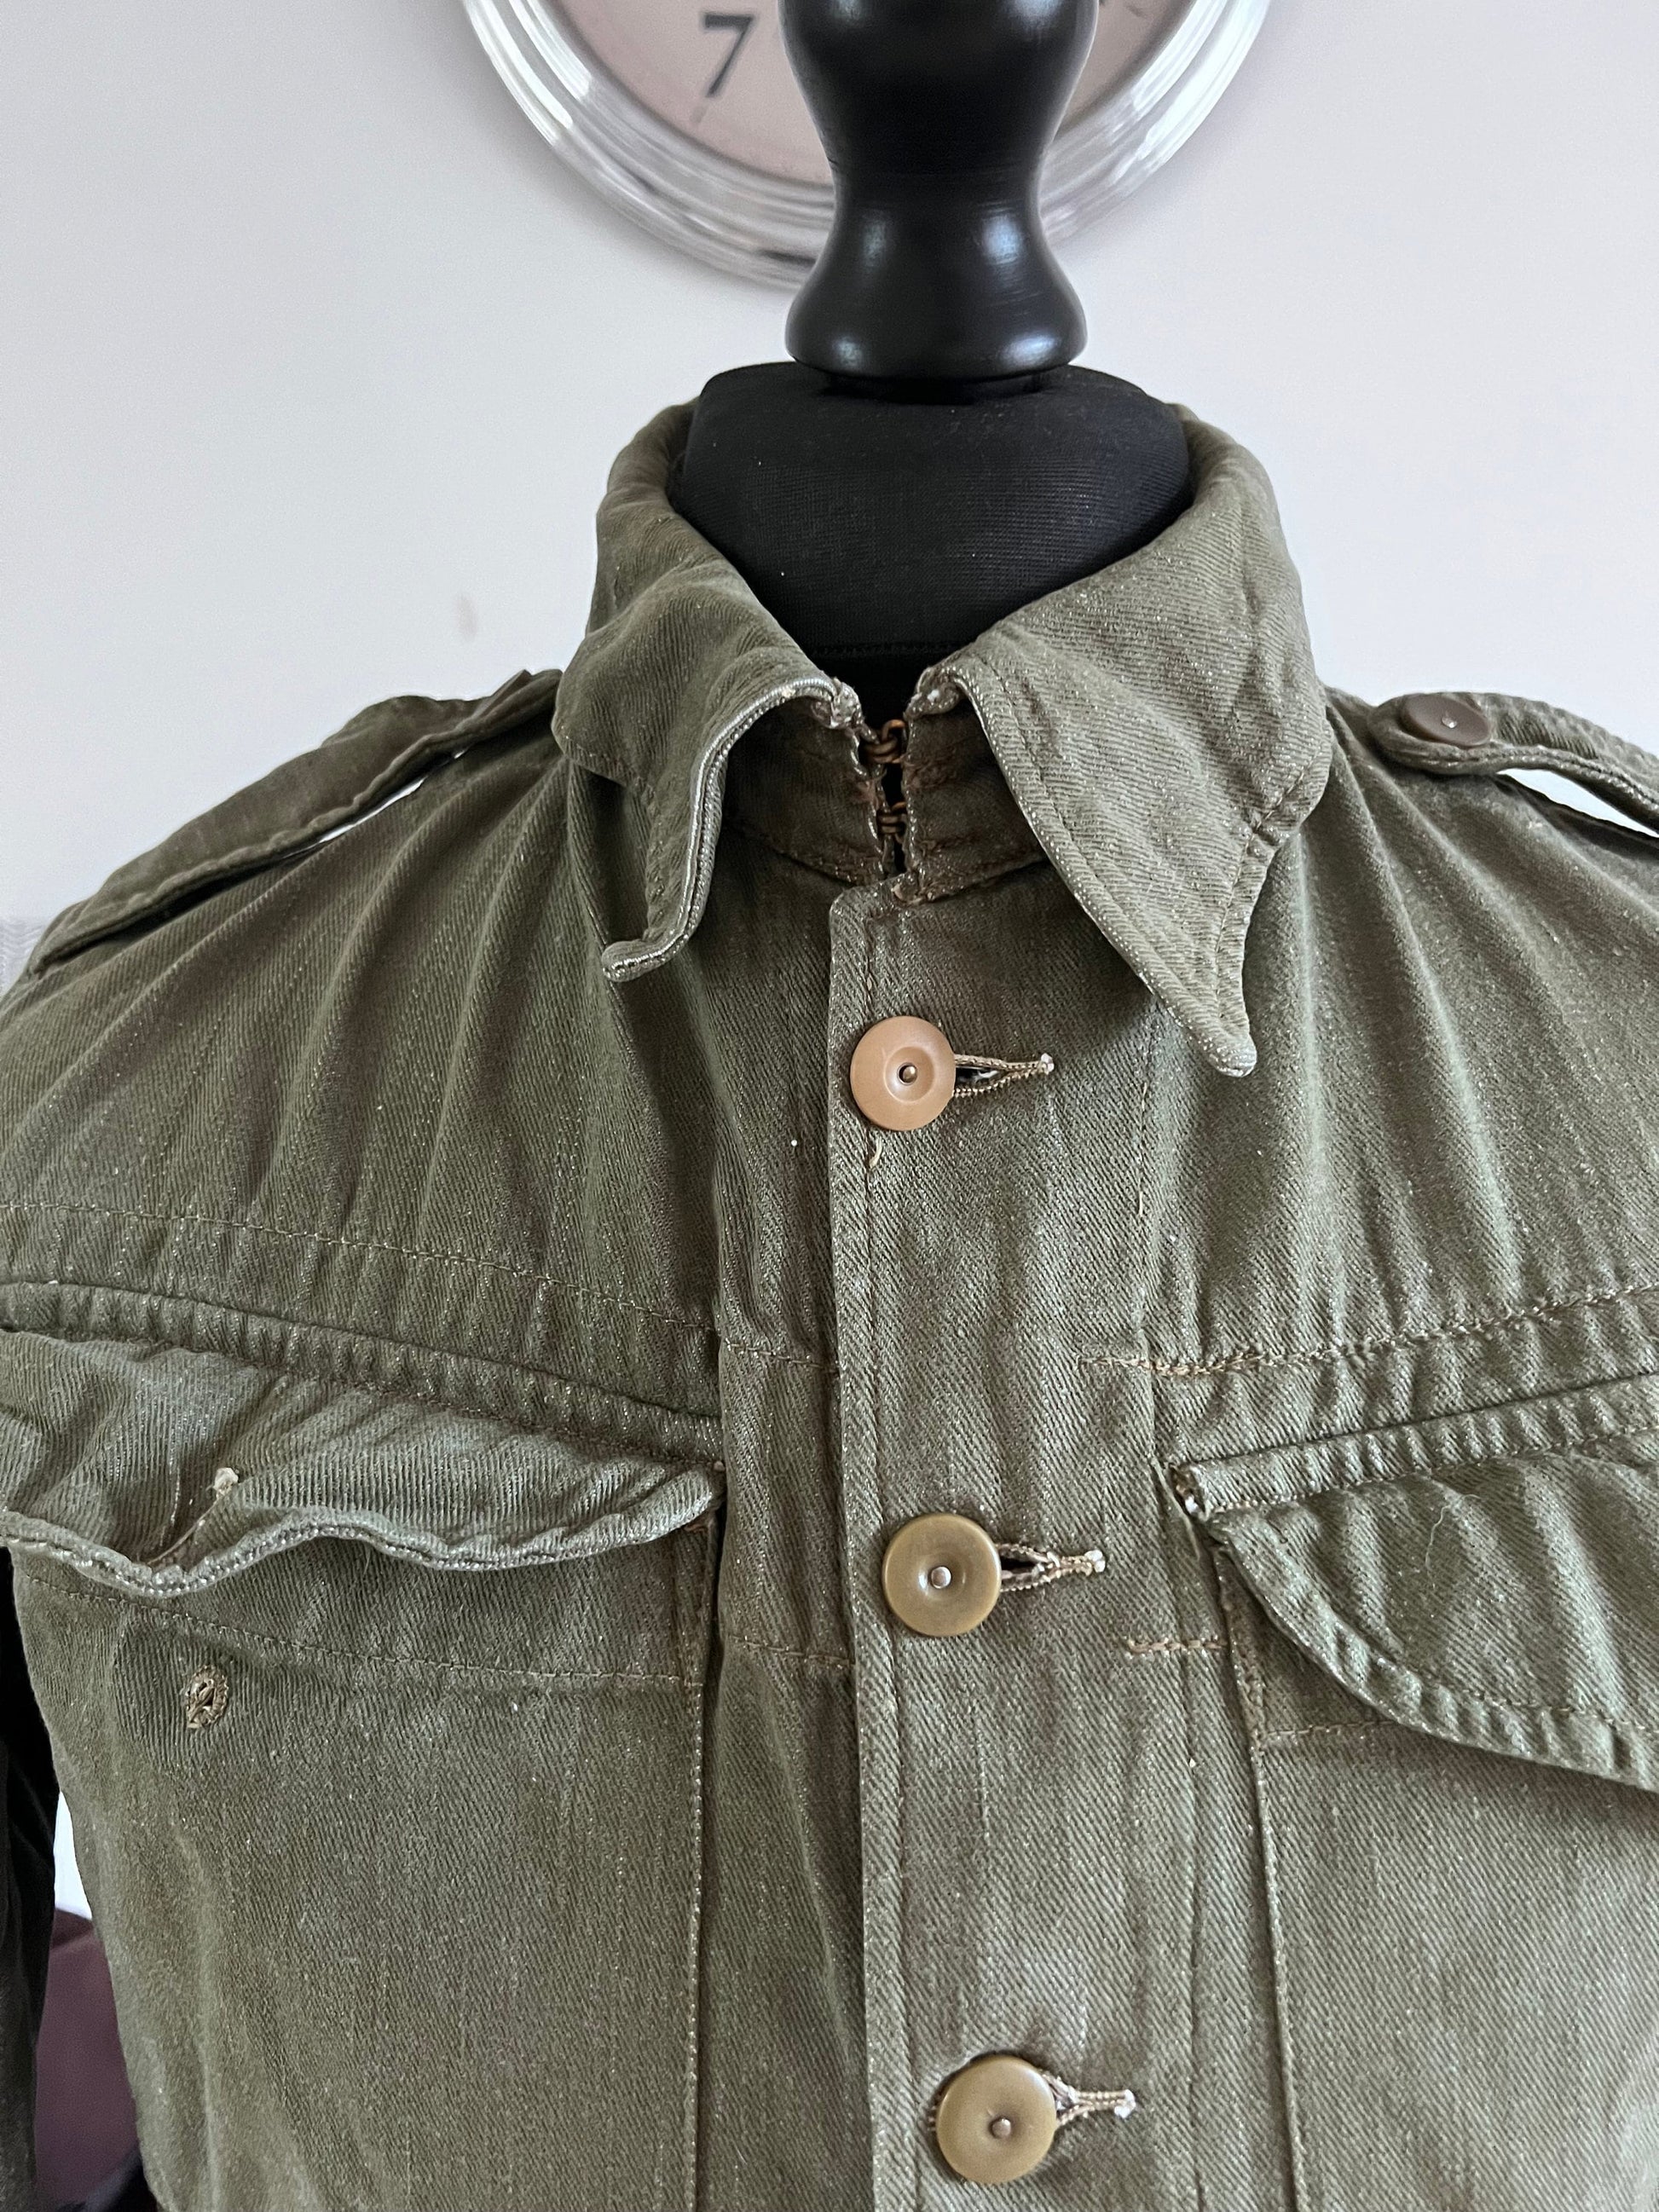 Vintage 1952 British Army Royal Marines Military Overalls Denim Blouse Olive Green Jacket S/M